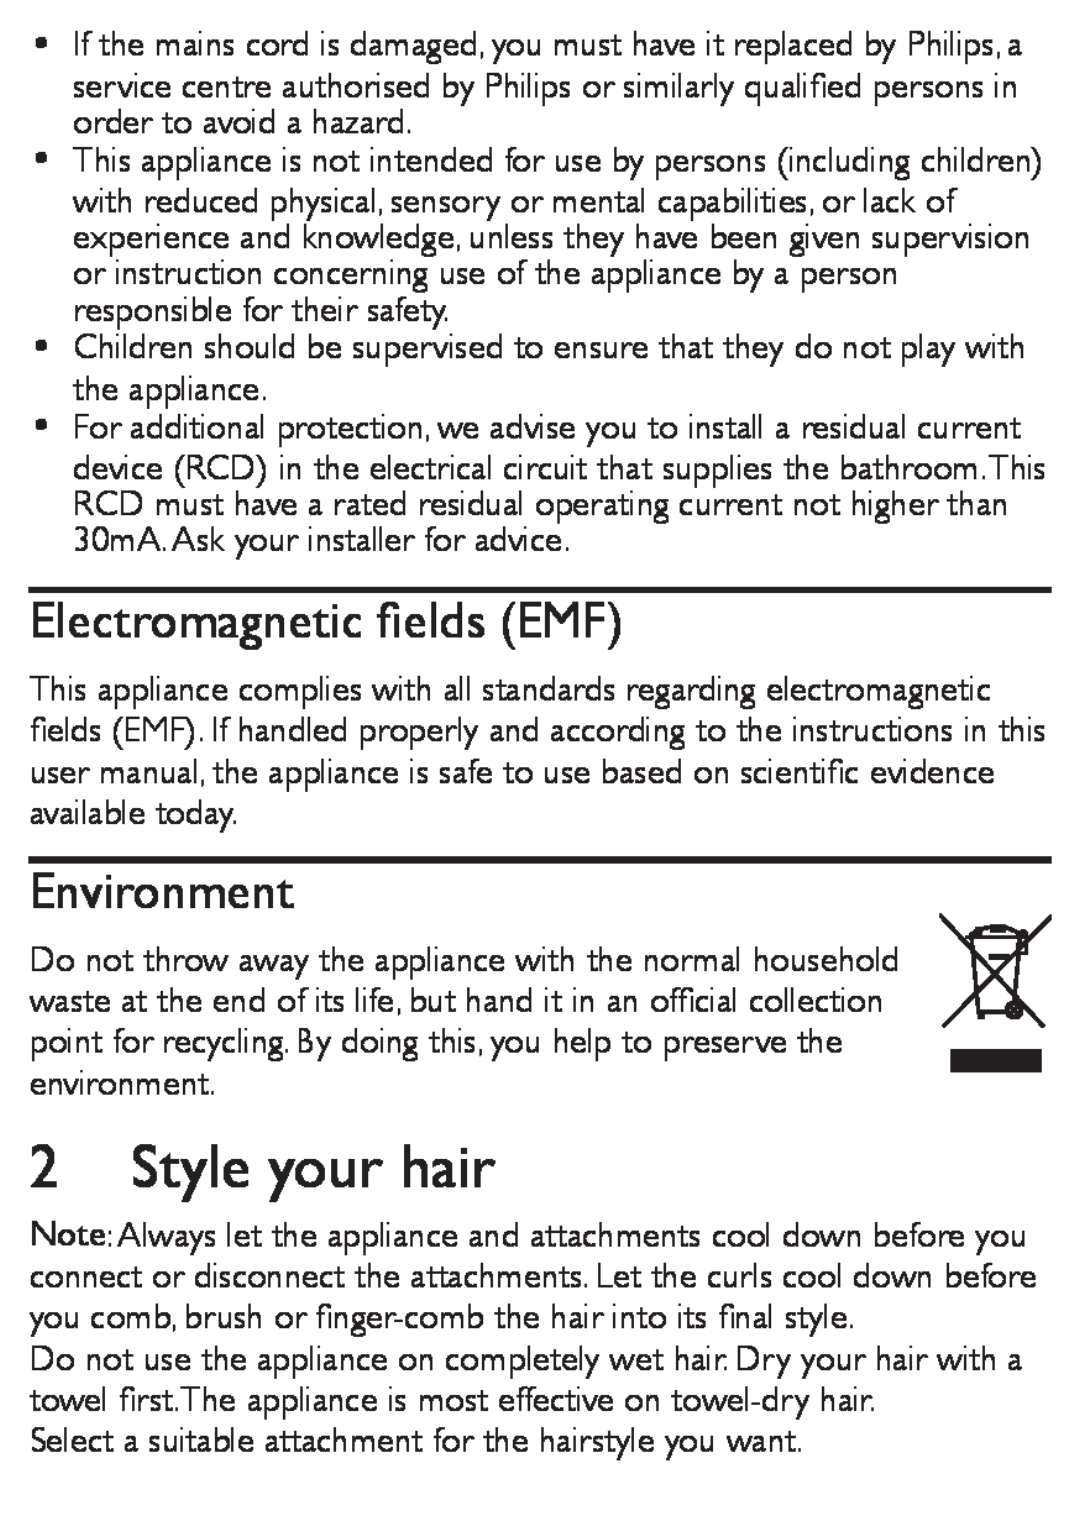 Philips HP8651, HP8650 user manual Style your hair, Electromagnetic ﬁelds EMF, Environment 